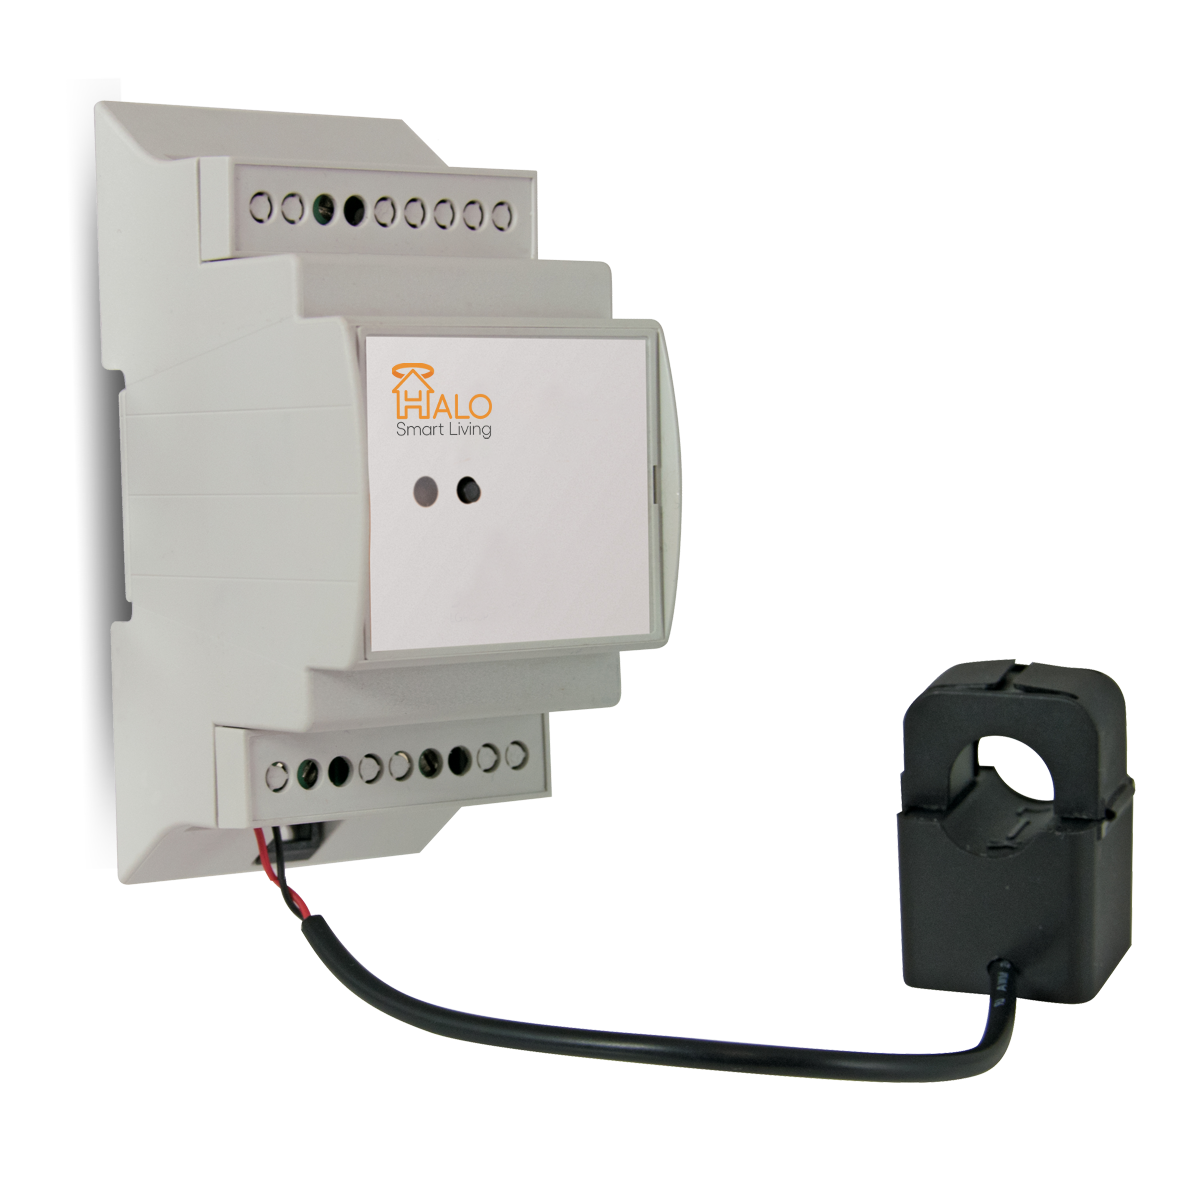 Wireless single-phase energy meter for Halo Smart Solar Smart systems